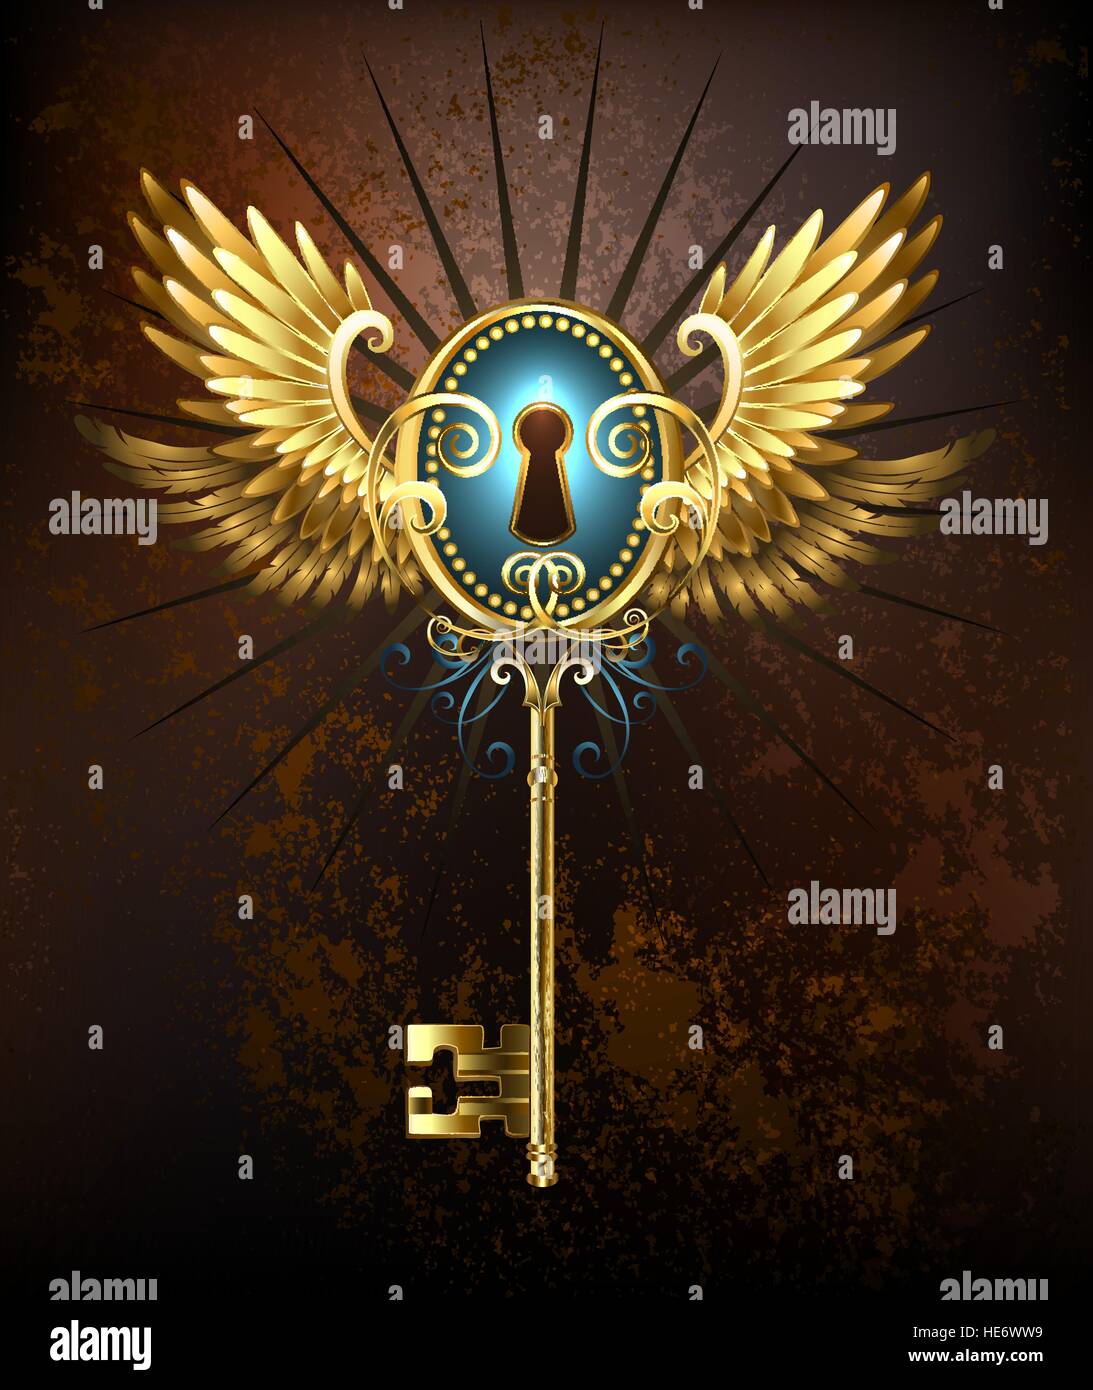 Steampunk golden key with mechanical wings on a rusty textural background. Stock Vector